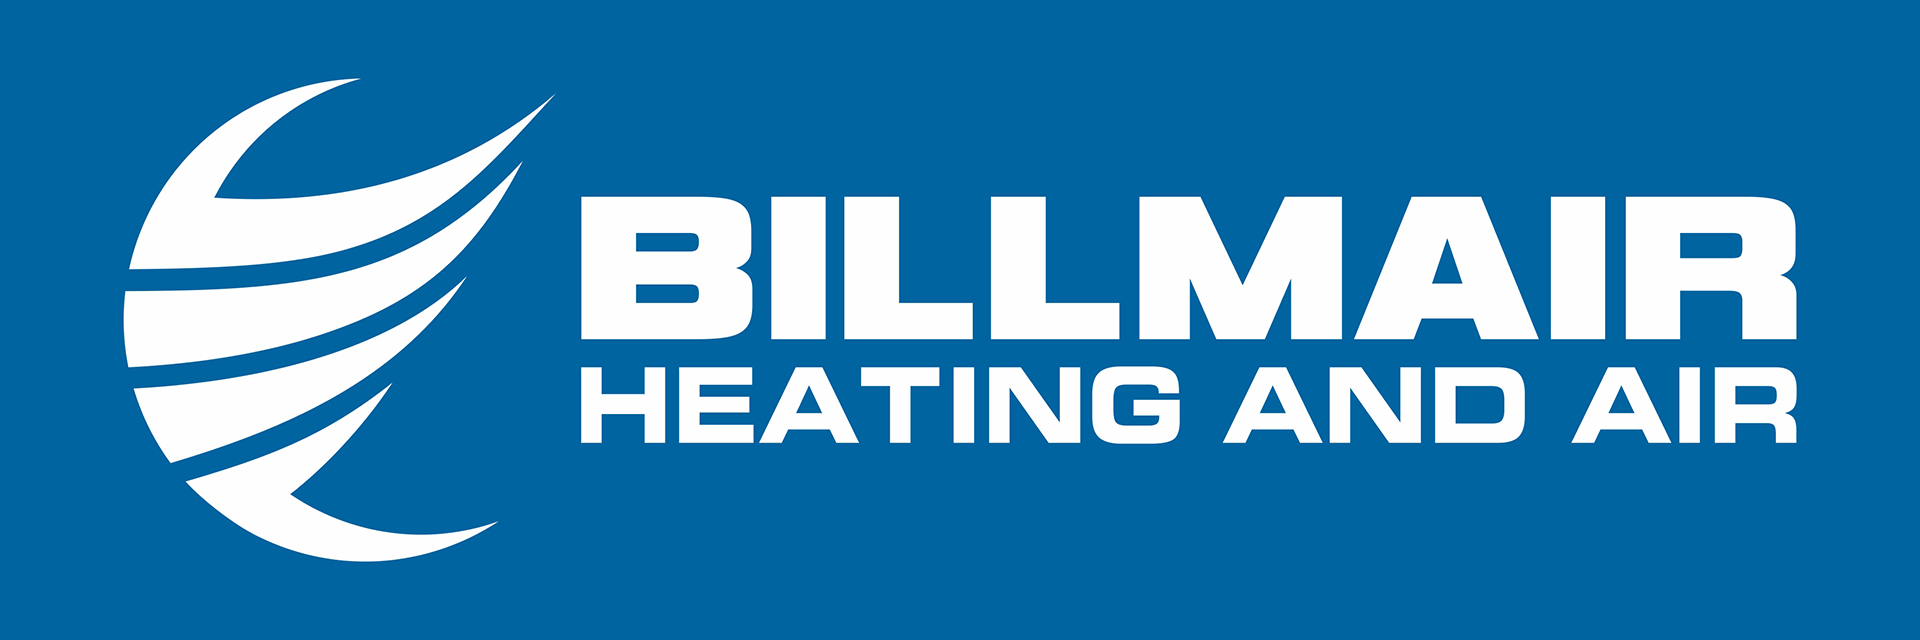 Save on Energy Bills with Bills Heating and Air